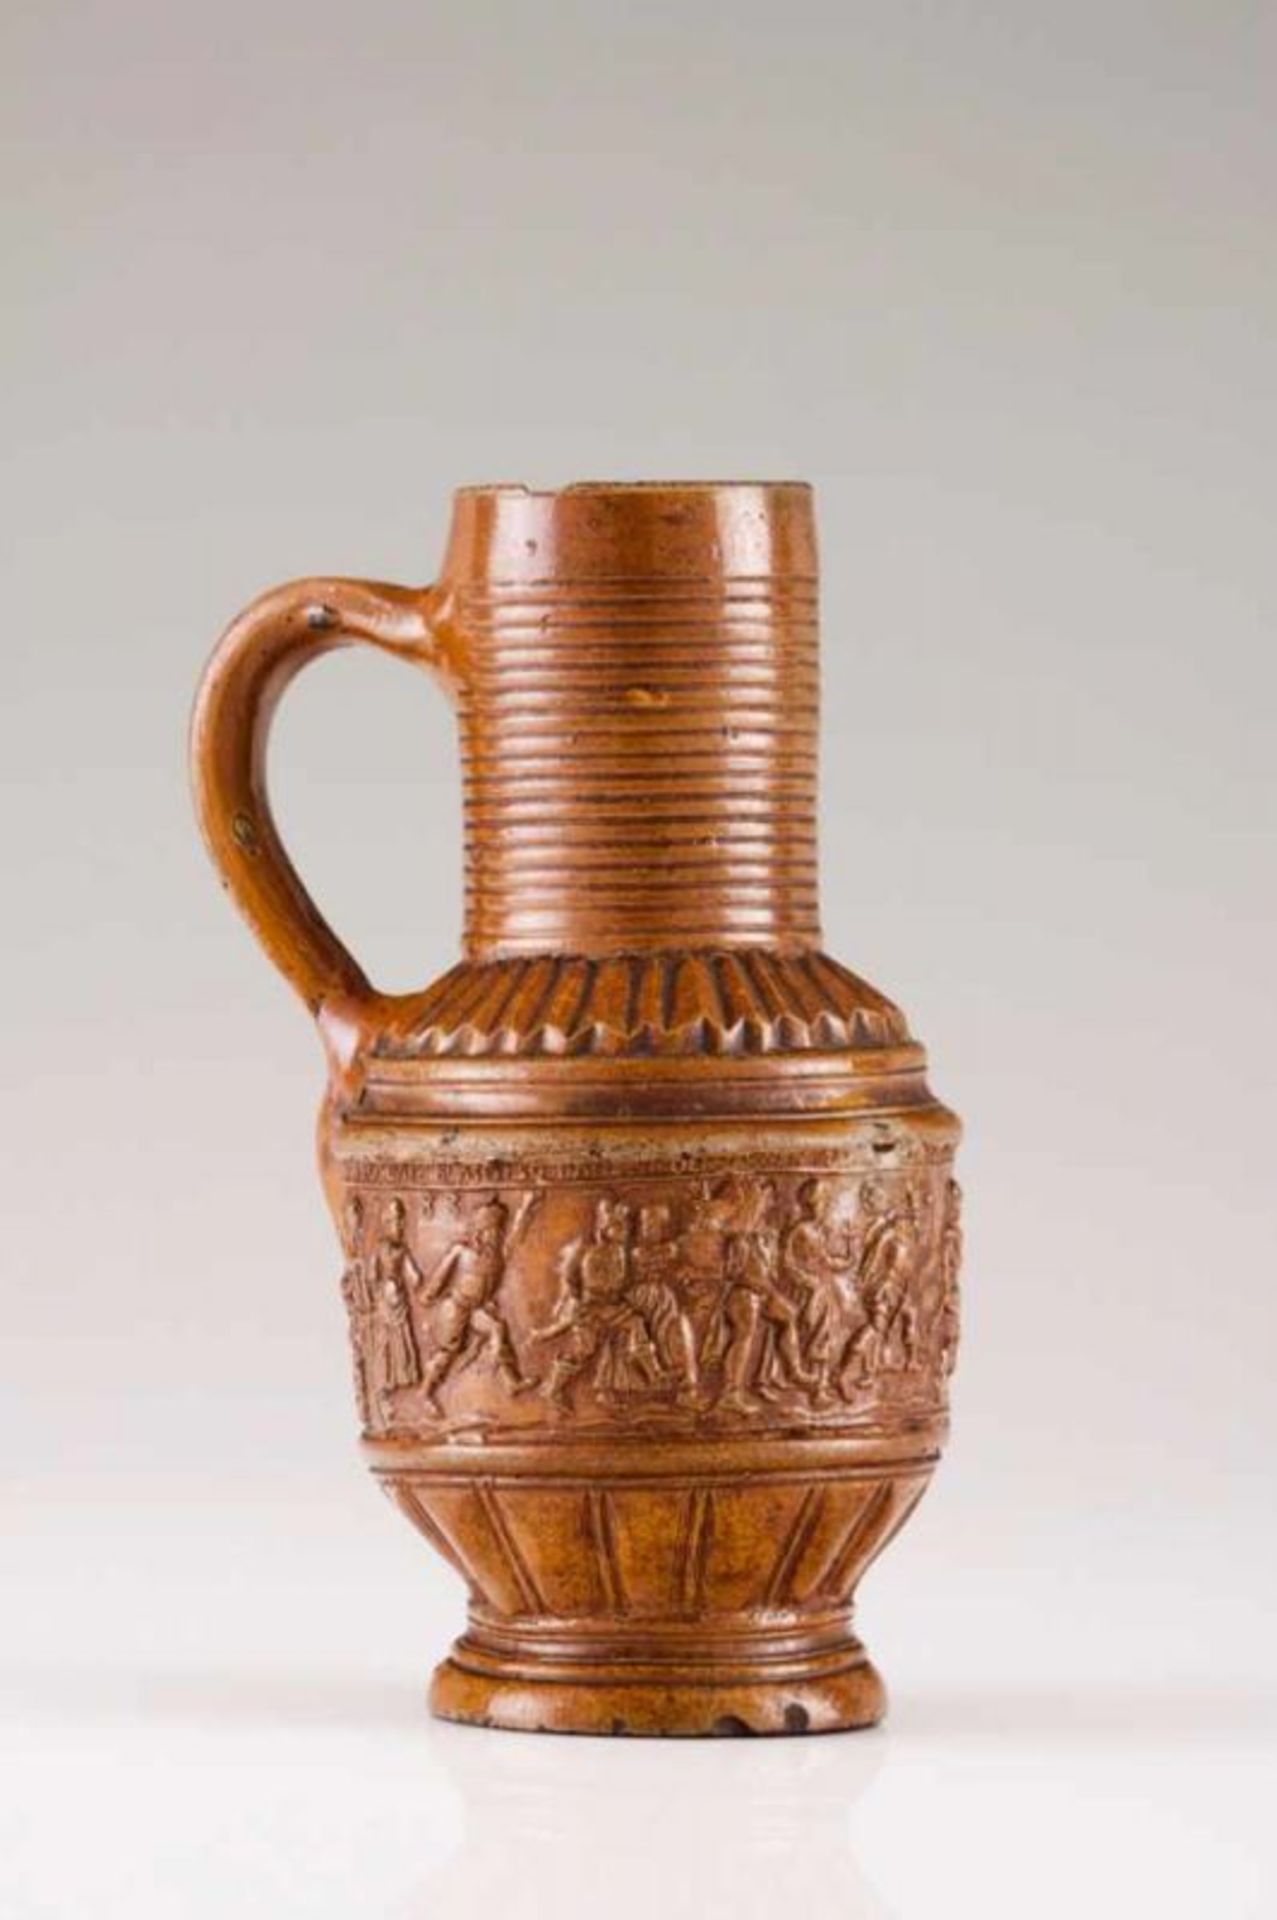 A beer jug German faience Monochron in brown shades Decorated in relief with tavern scenes Dated